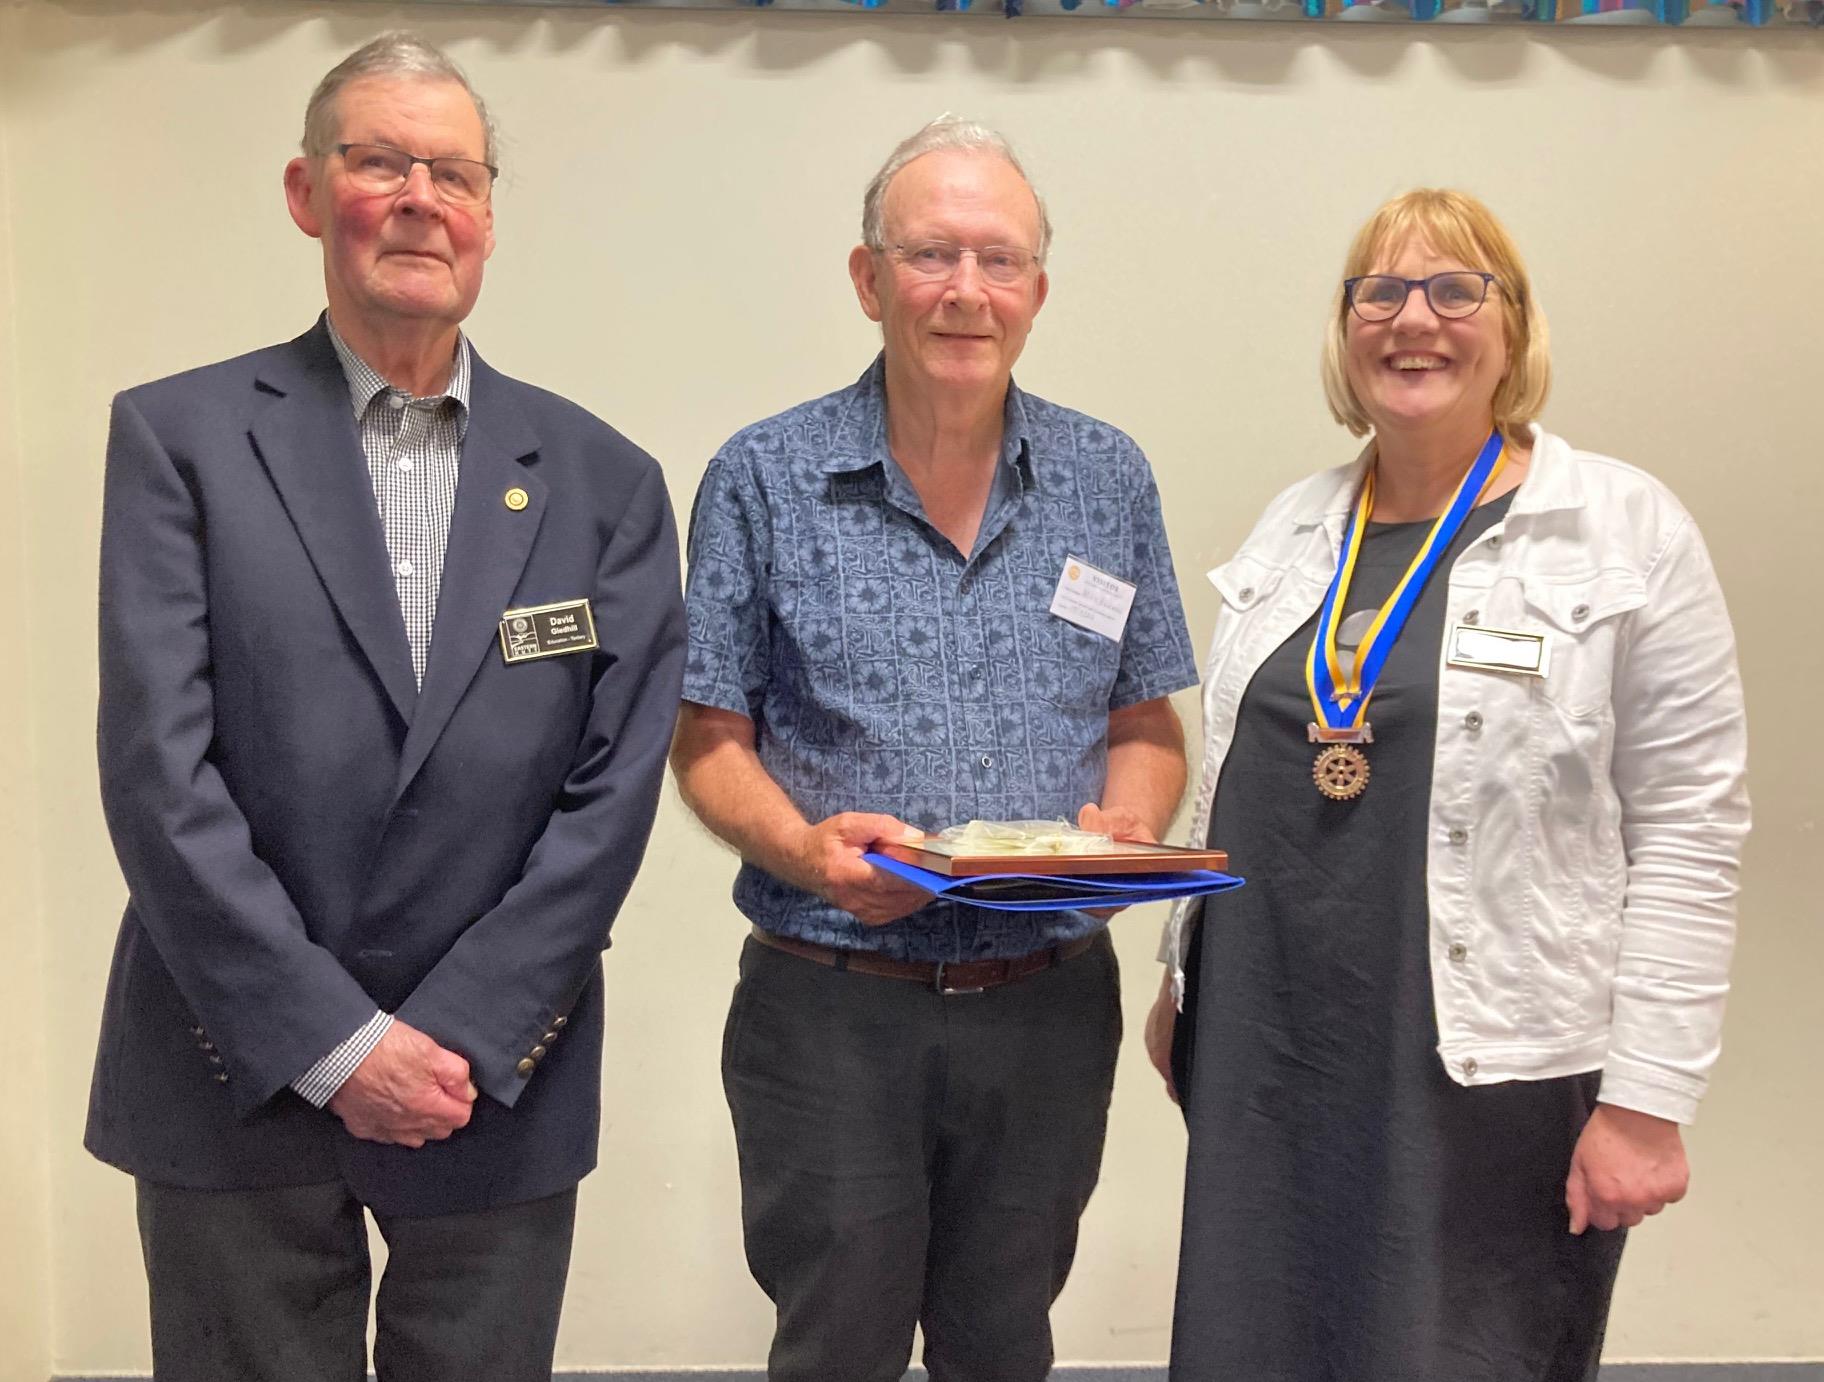 Welcome to our new member - Mike Keehan | The Rotary Club of Eastern Hutt